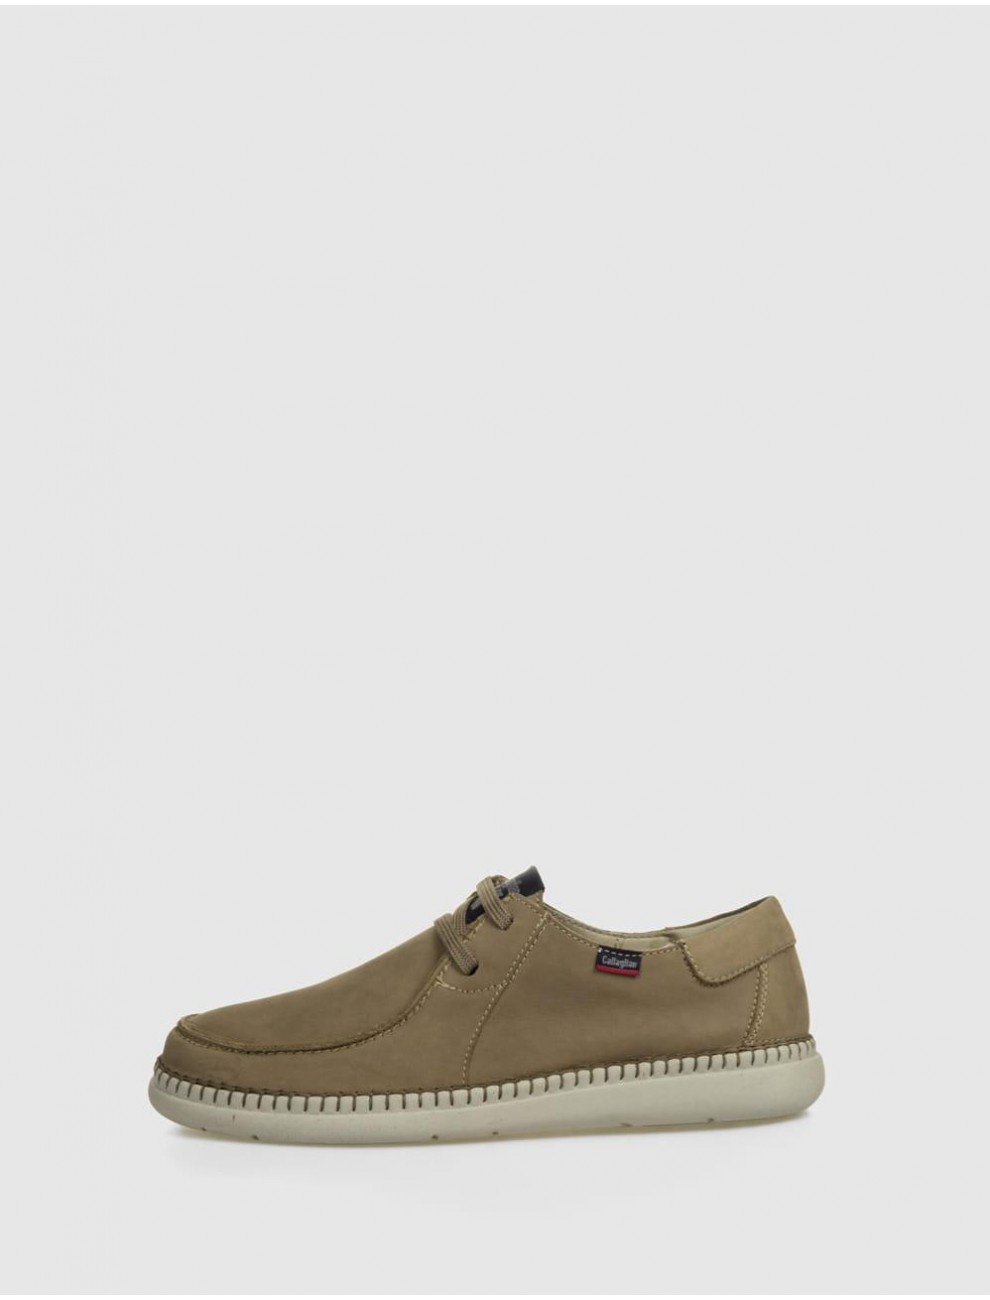 ZAPATO CALLAGHAN 57600 TAUPE